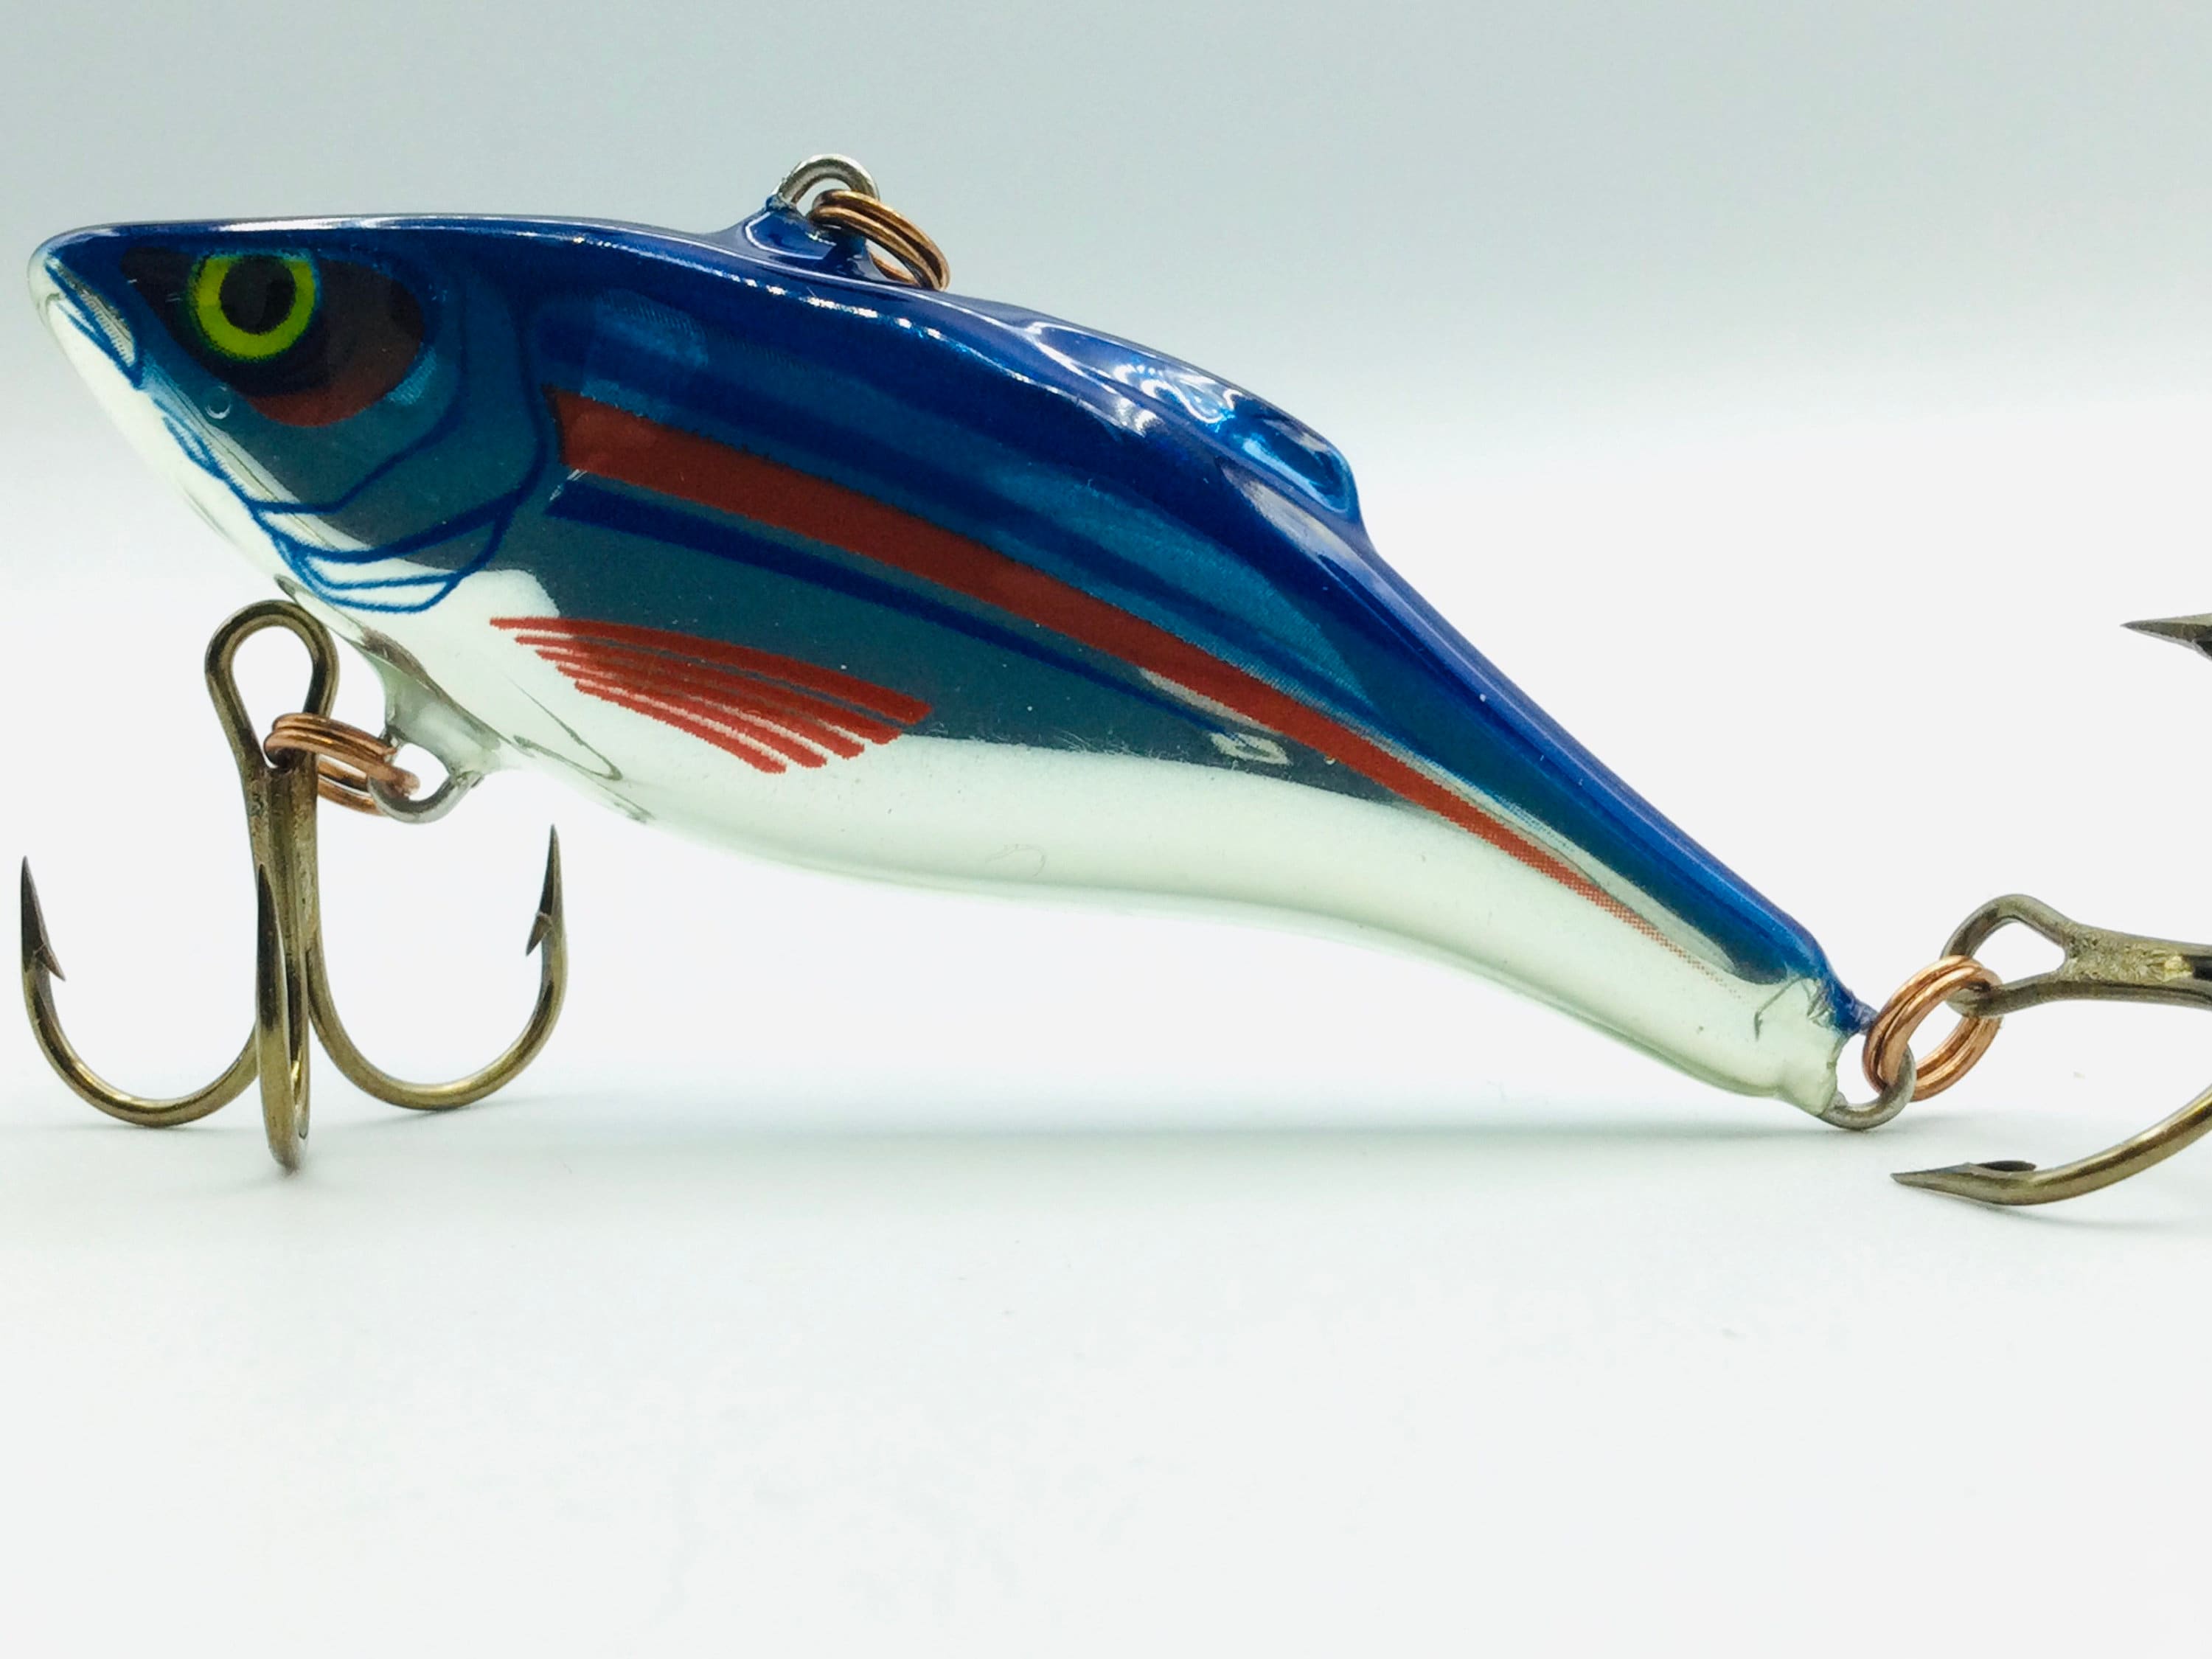 Vintage Double Hook Rattlin' Rapala Sinking Metallic Minnow Fishing Lure  Featuring Original Manufacturers Packaging -  Canada